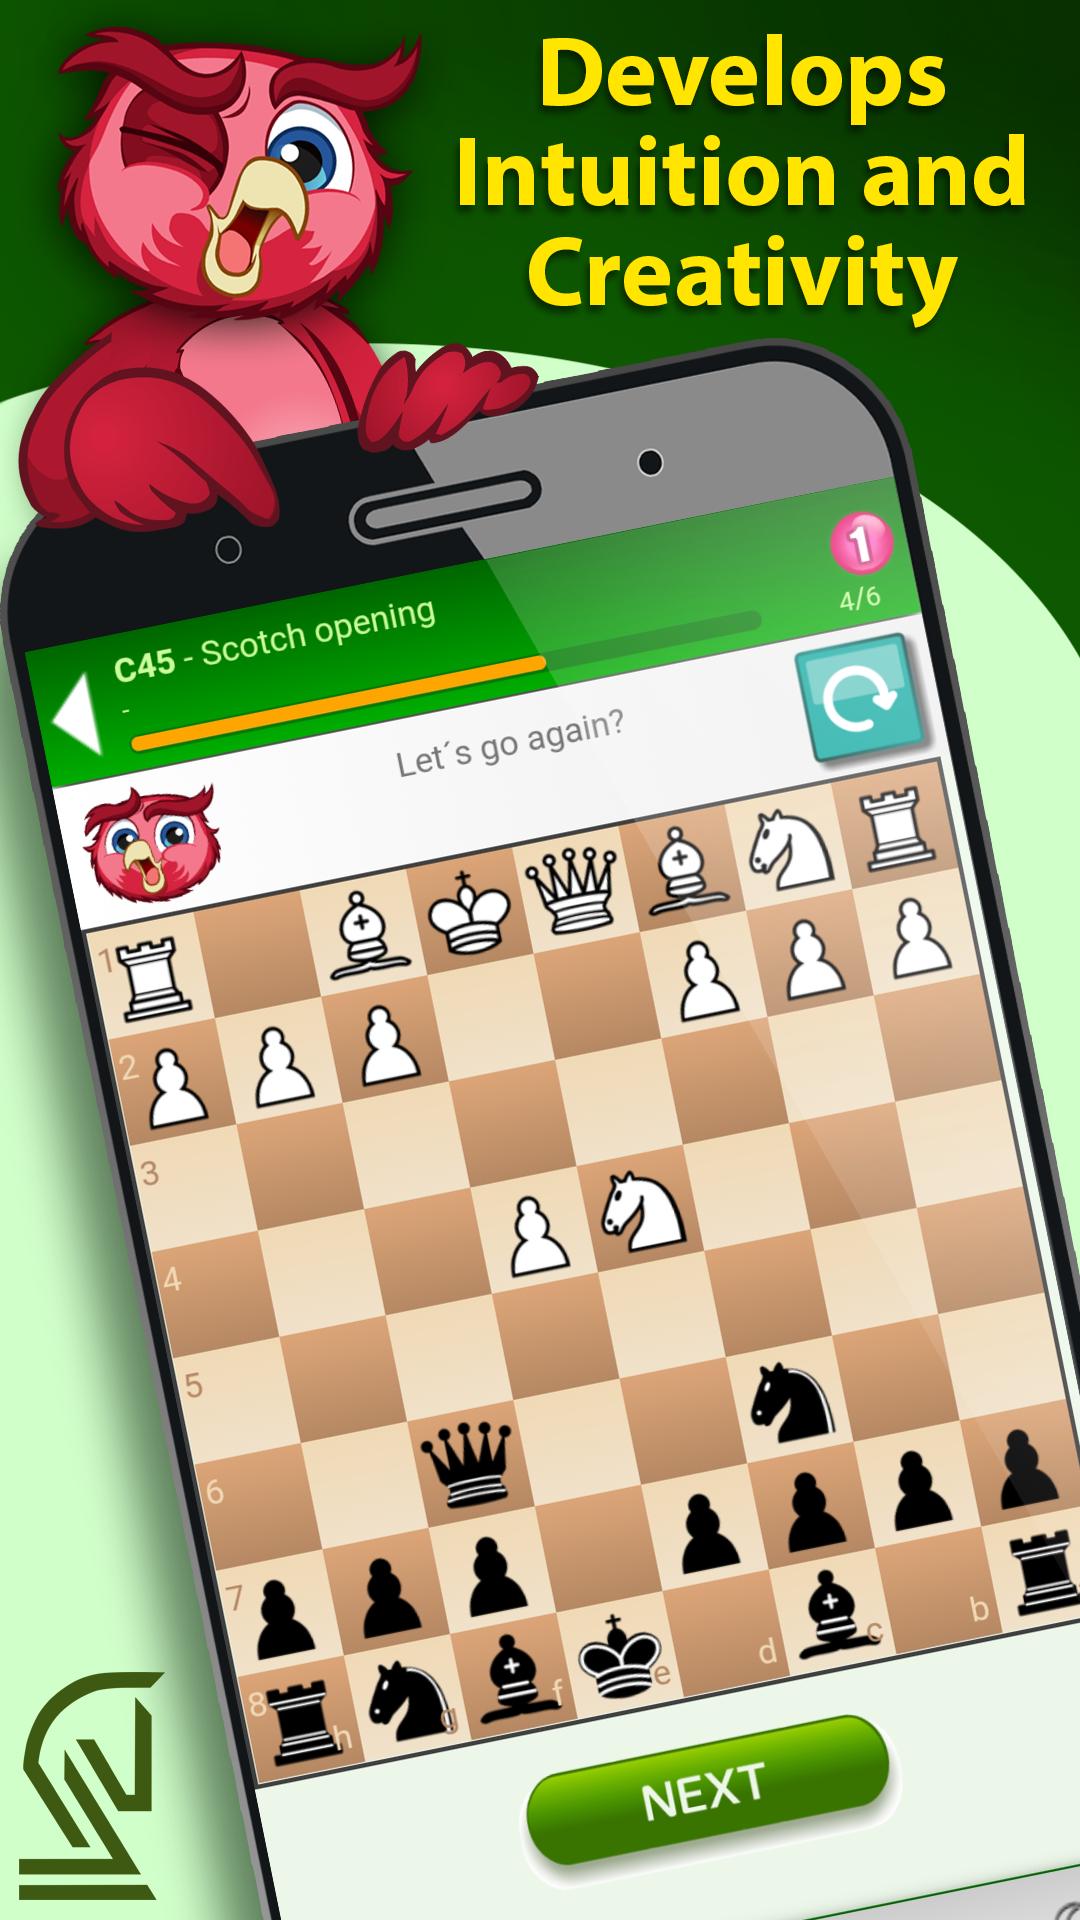 Chess Openings Pró-Master - Apps on Google Play